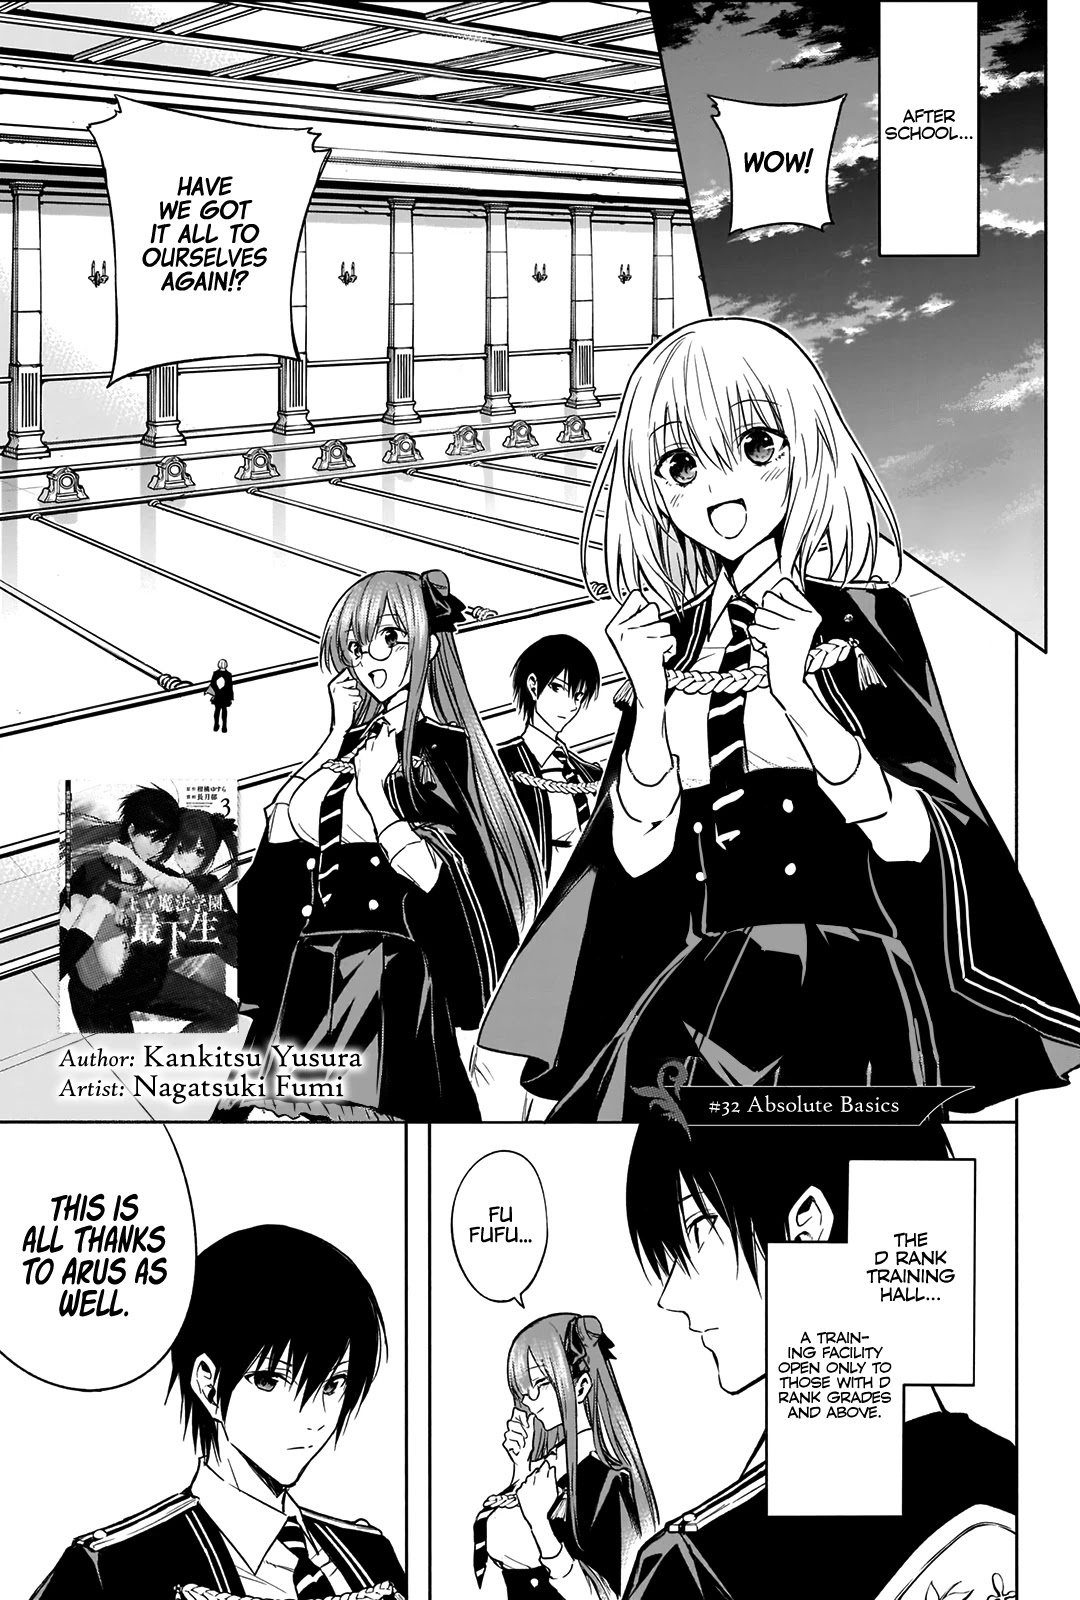 The Irregular Of The Royal Academy Of Magic ~The Strongest Sorcerer From The Slums Is Unrivaled In The School Of Royals ~ - Page 2